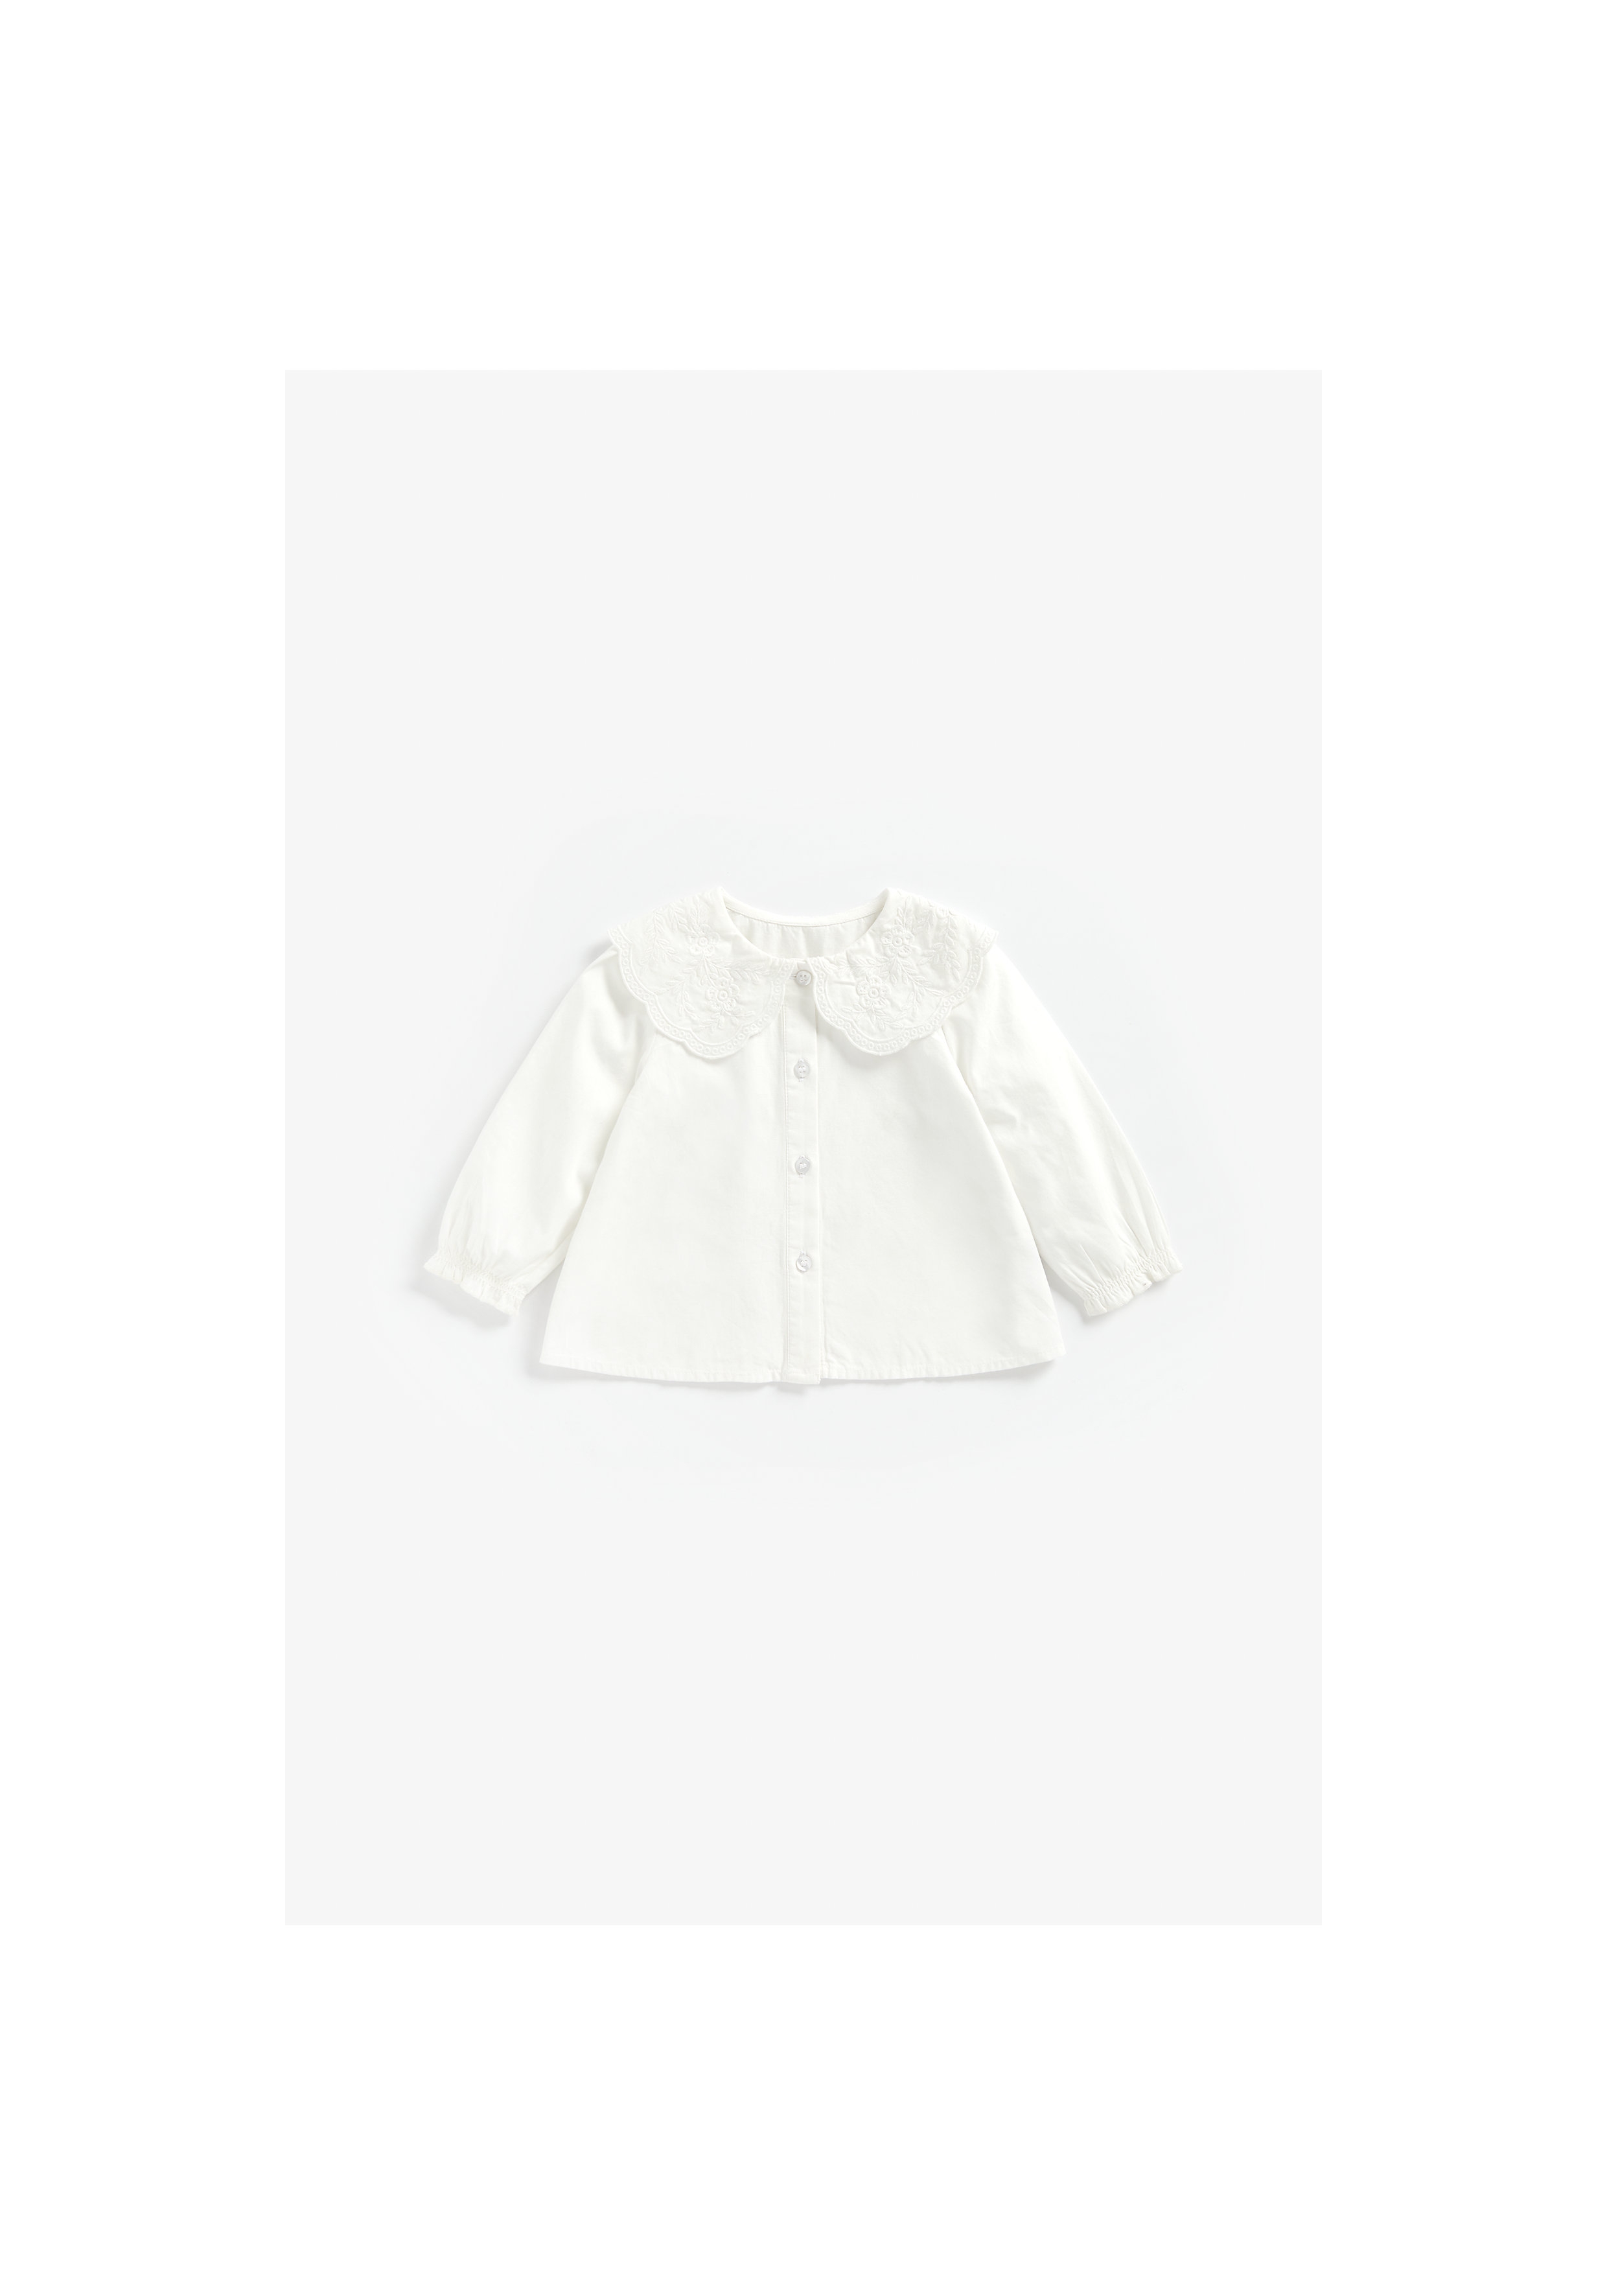 Mothercare | Girls Full Sleeves Top With Embroidered Collar - White